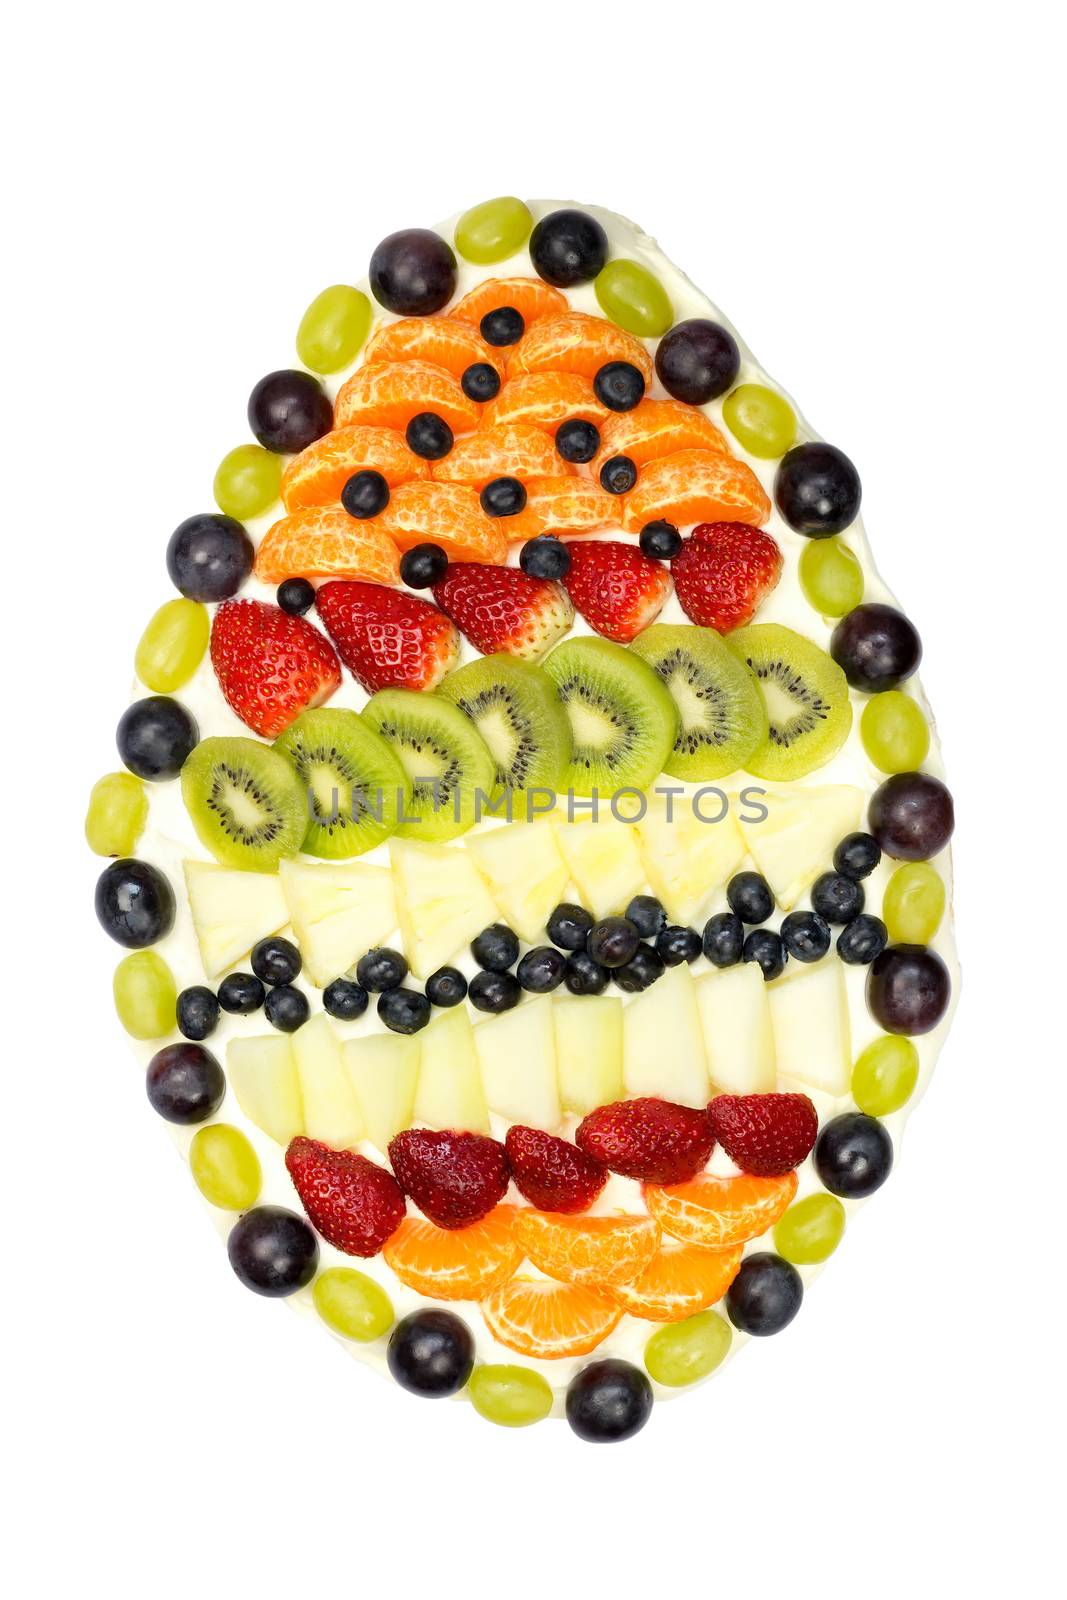 Egg shaped fruit pie with various fruits by BenSchonewille